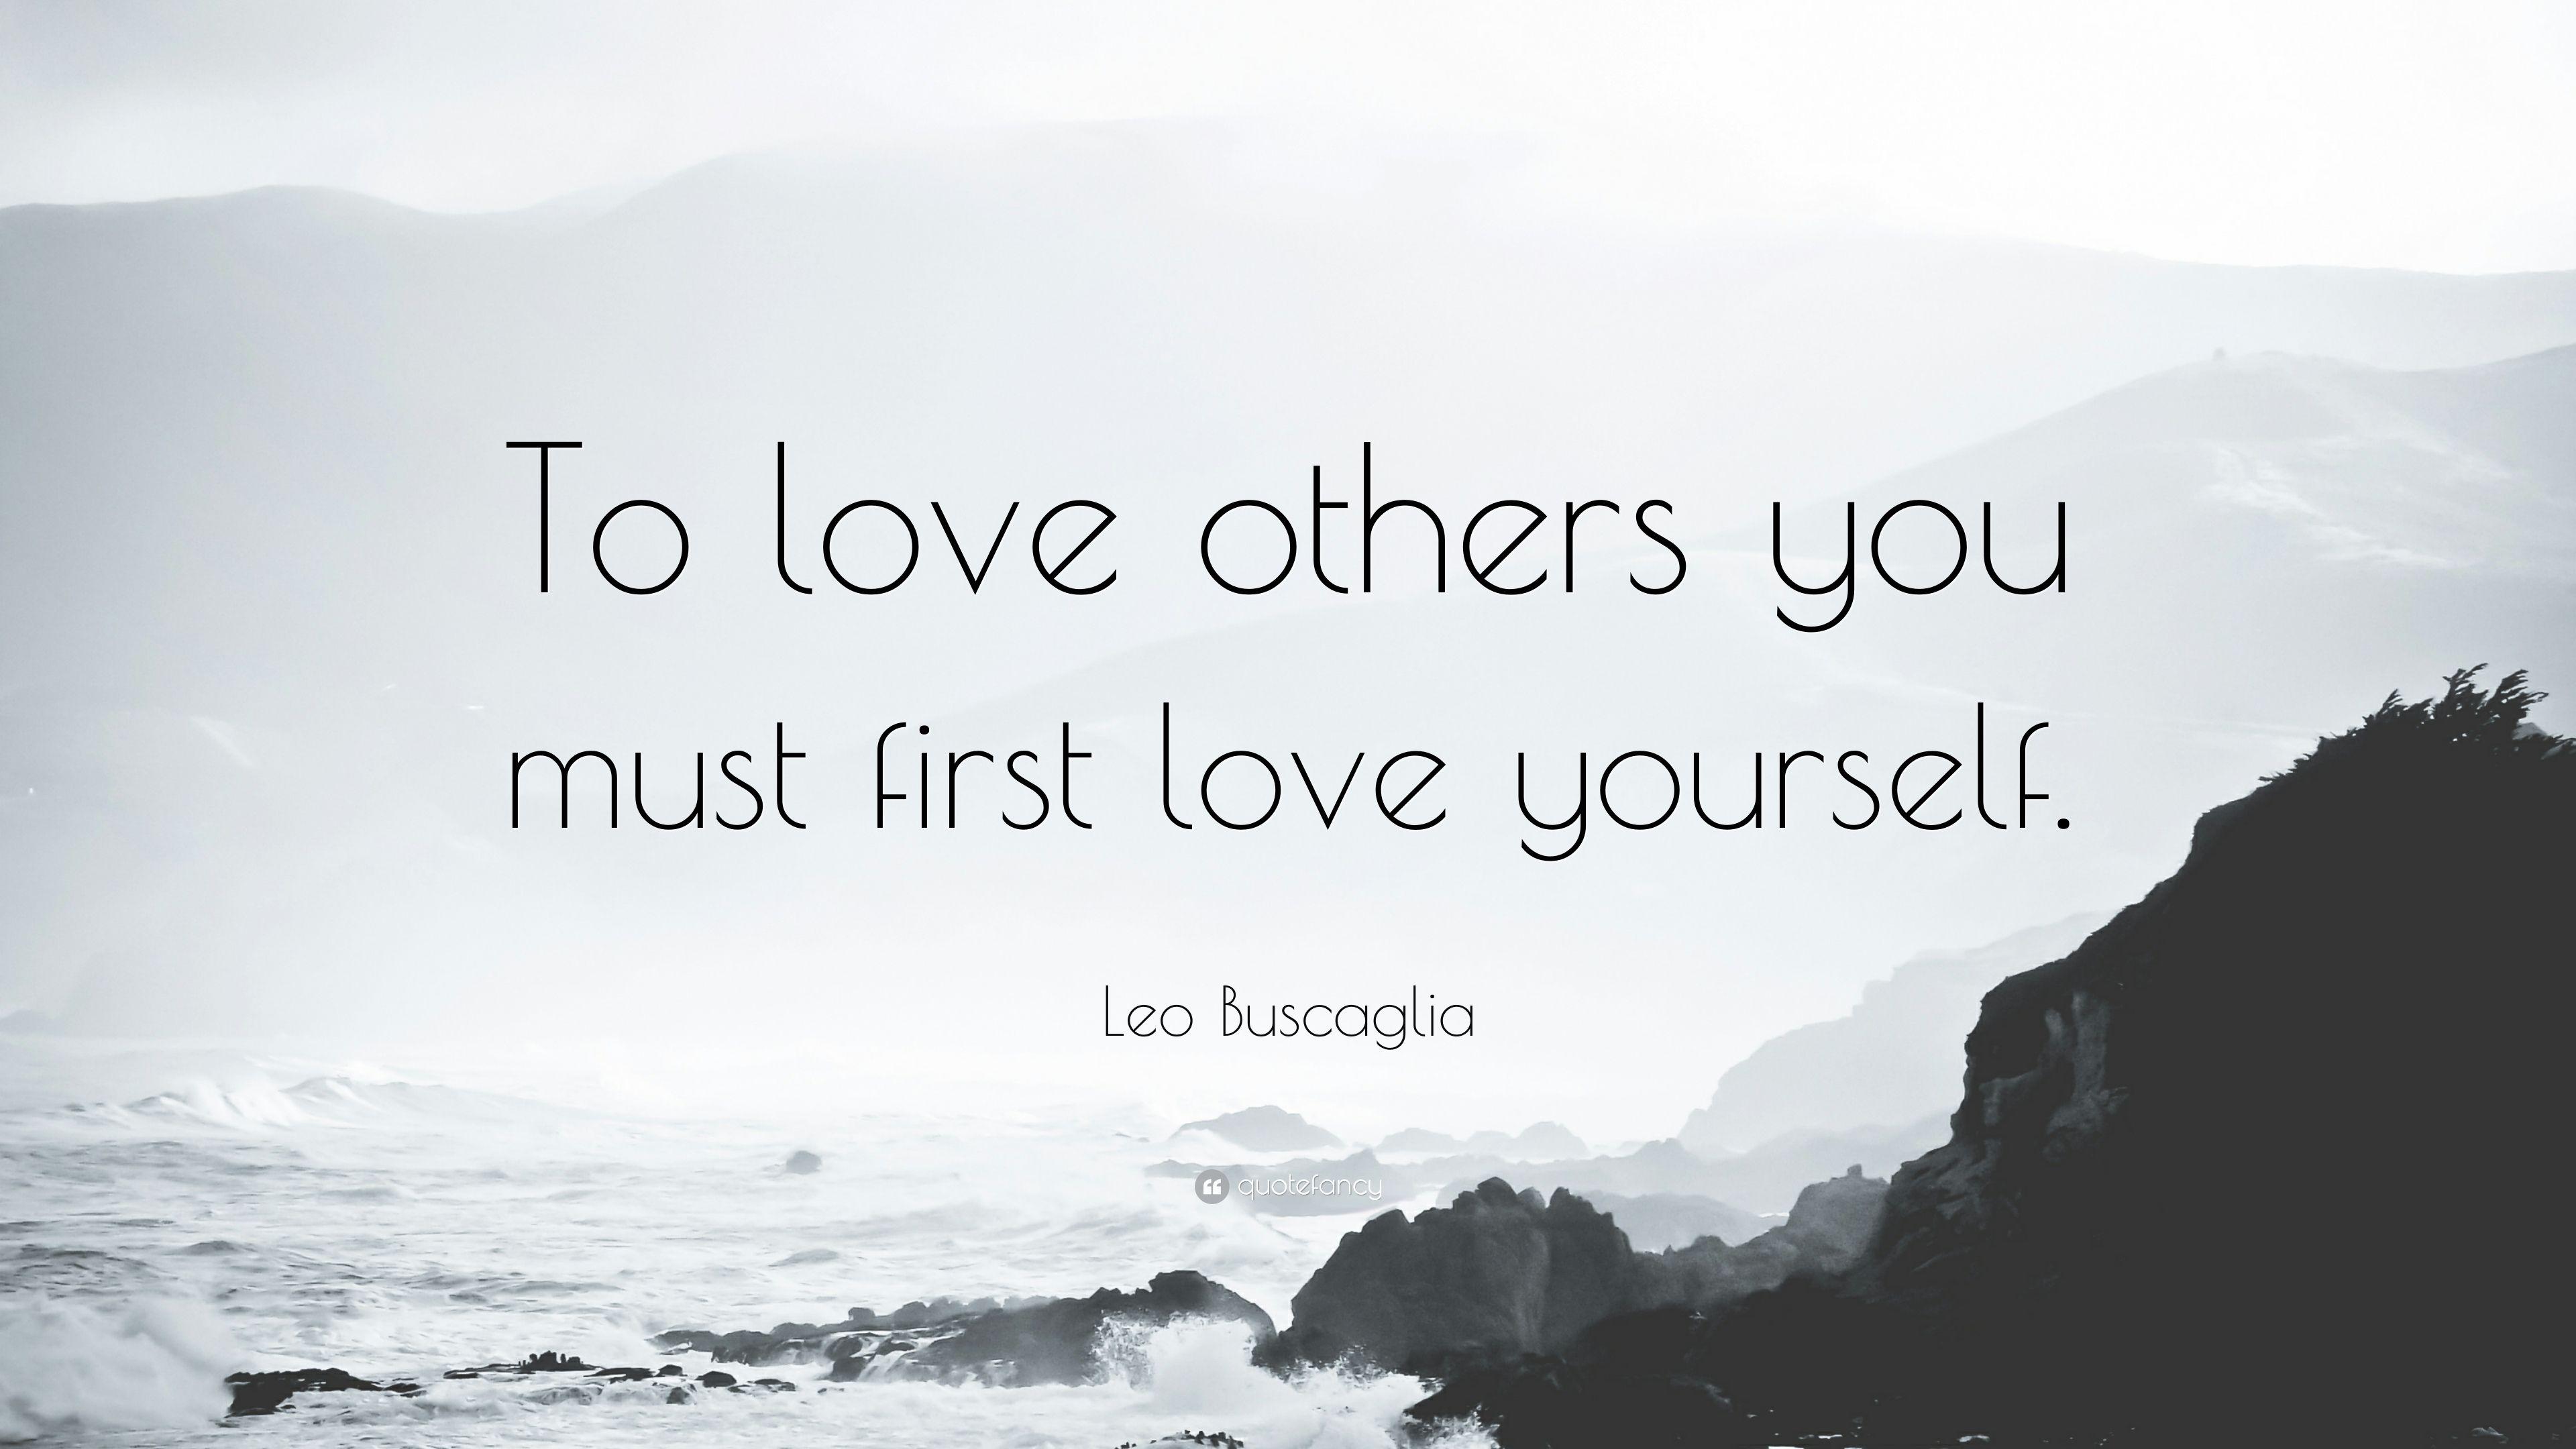 Leo Buscaglia Quote: “To love others you must first love yourself